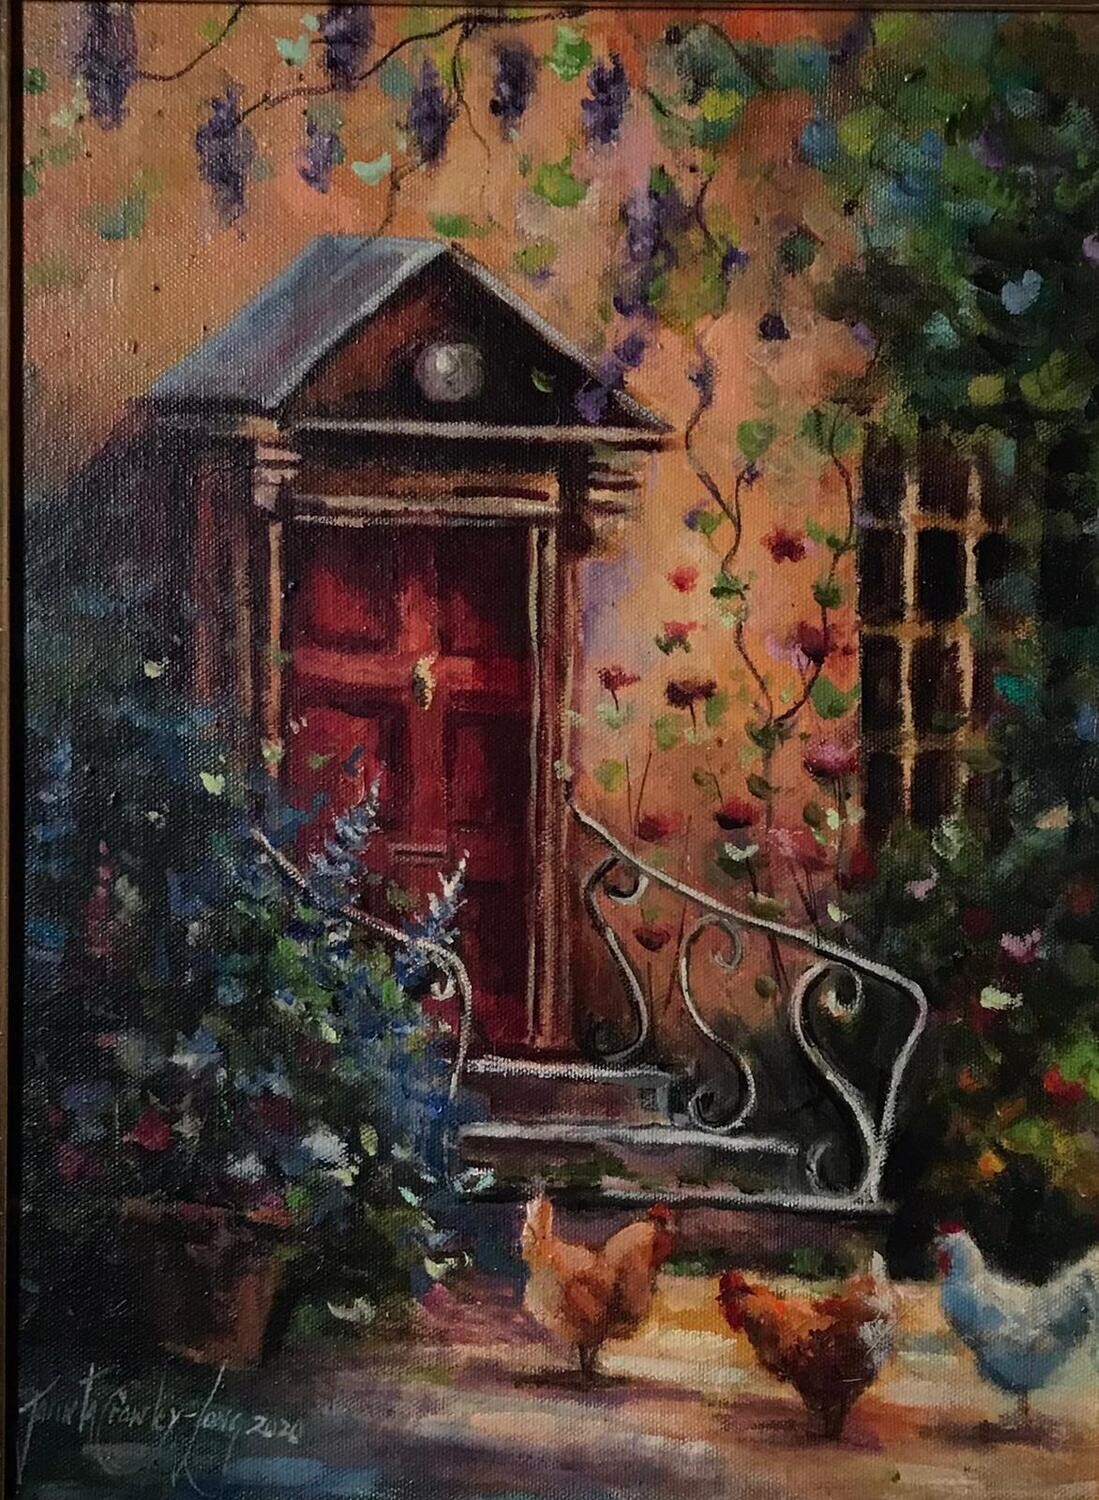 Fowl Play at the Red Door (16x12 inches)